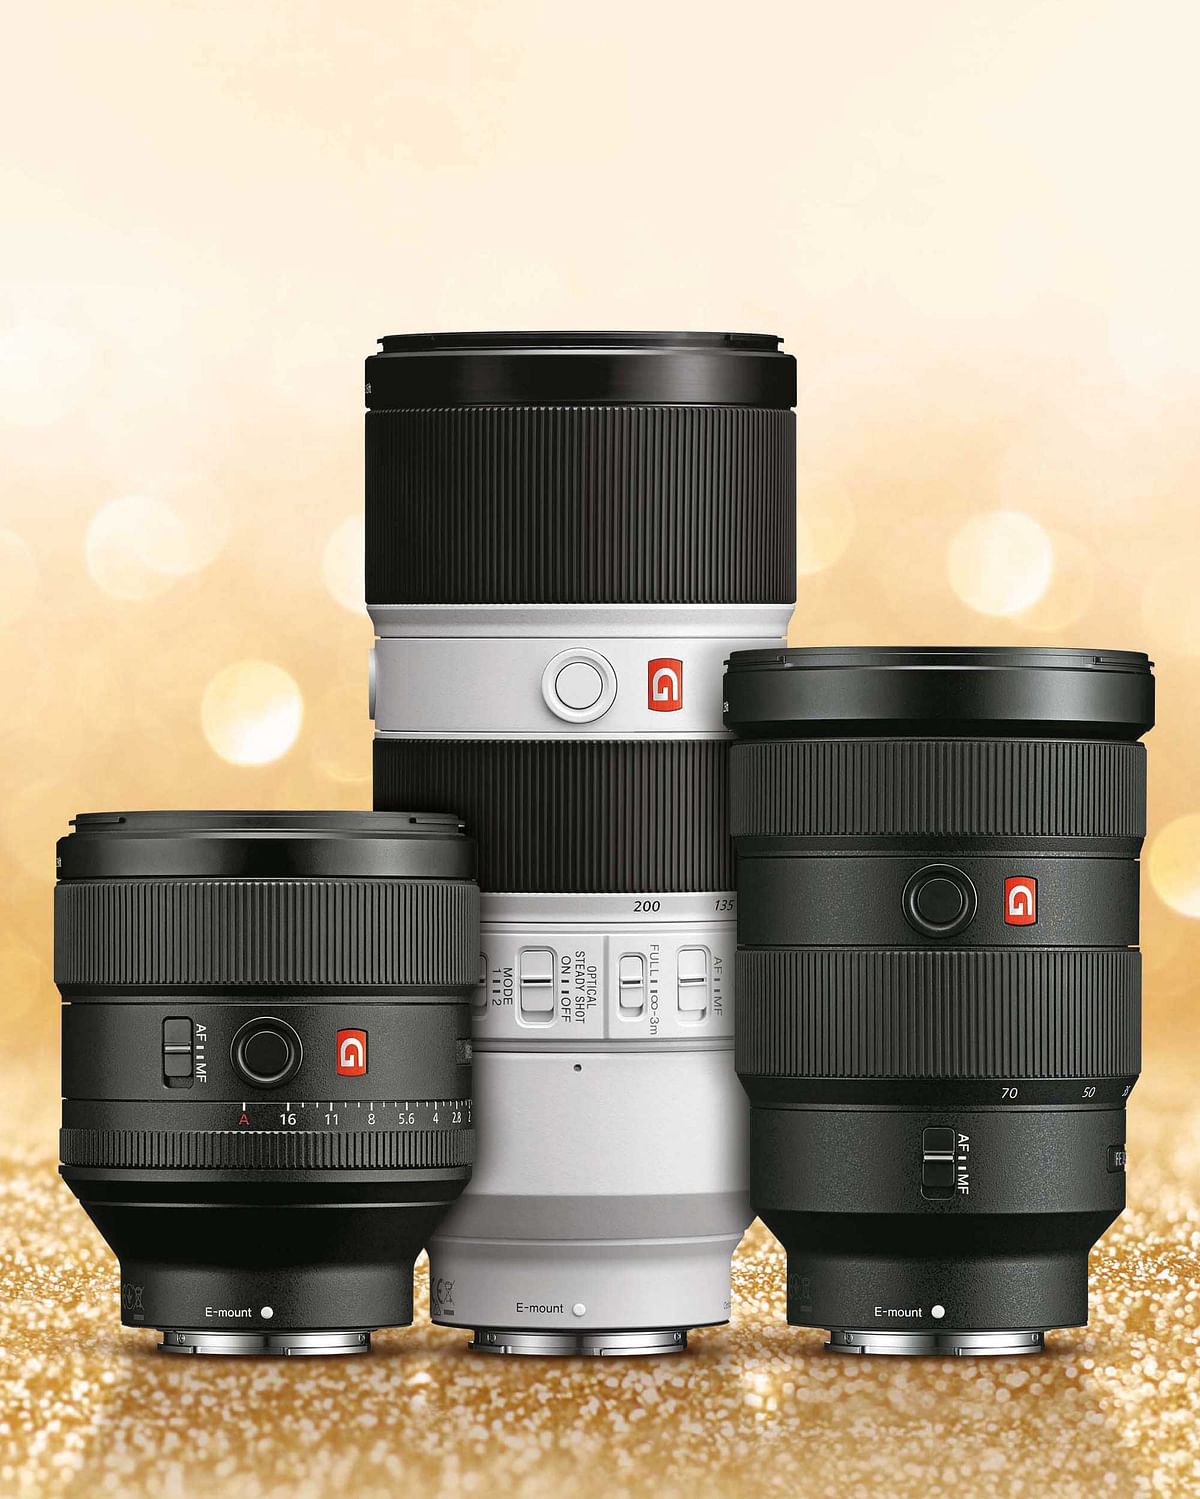 The new G Master brand includes three new E-mount full-frame lenses for professional photographers in India. 